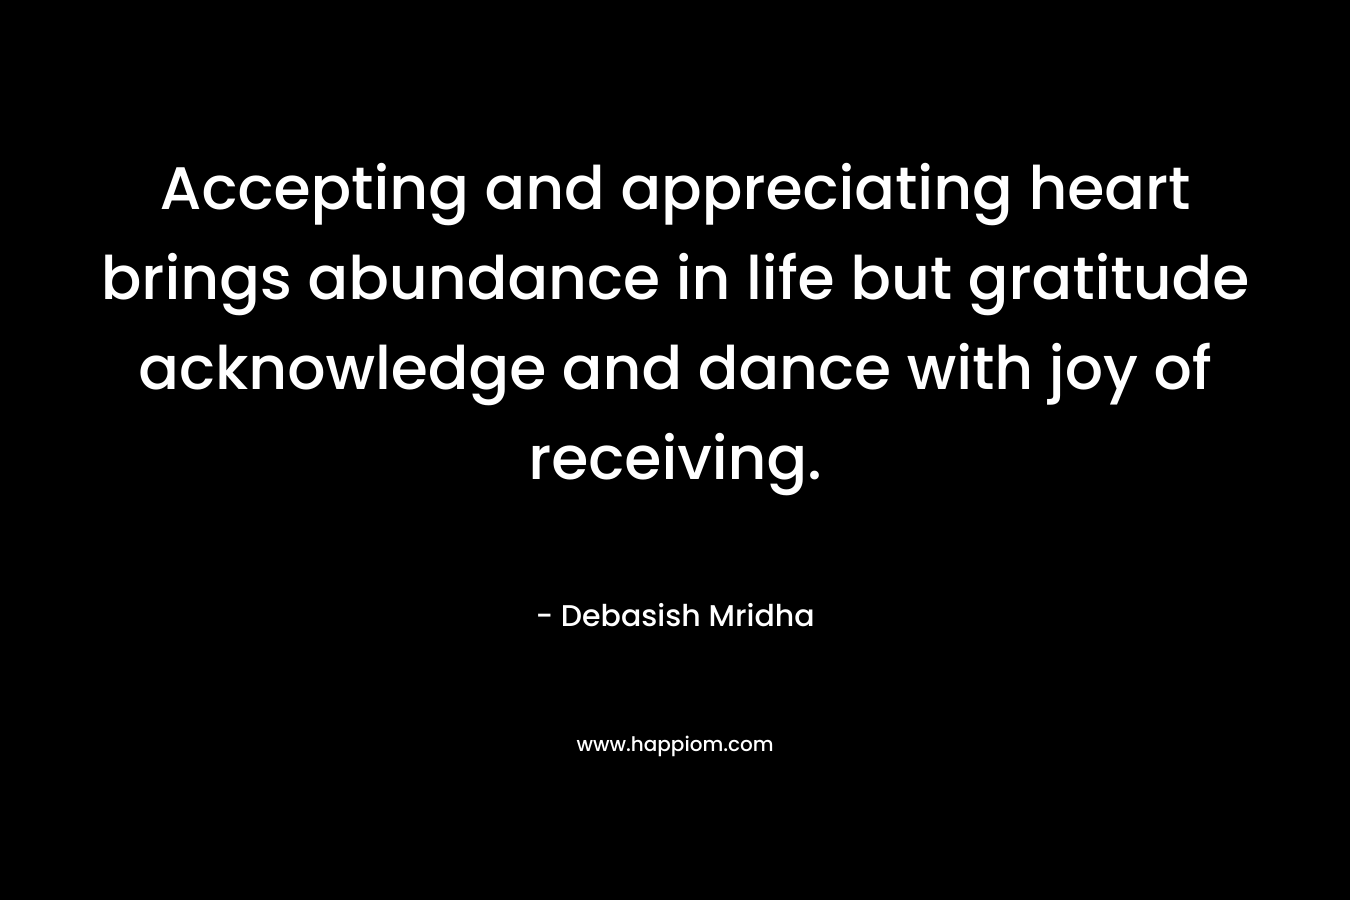 Accepting and appreciating heart brings abundance in life but gratitude acknowledge and dance with joy of receiving.